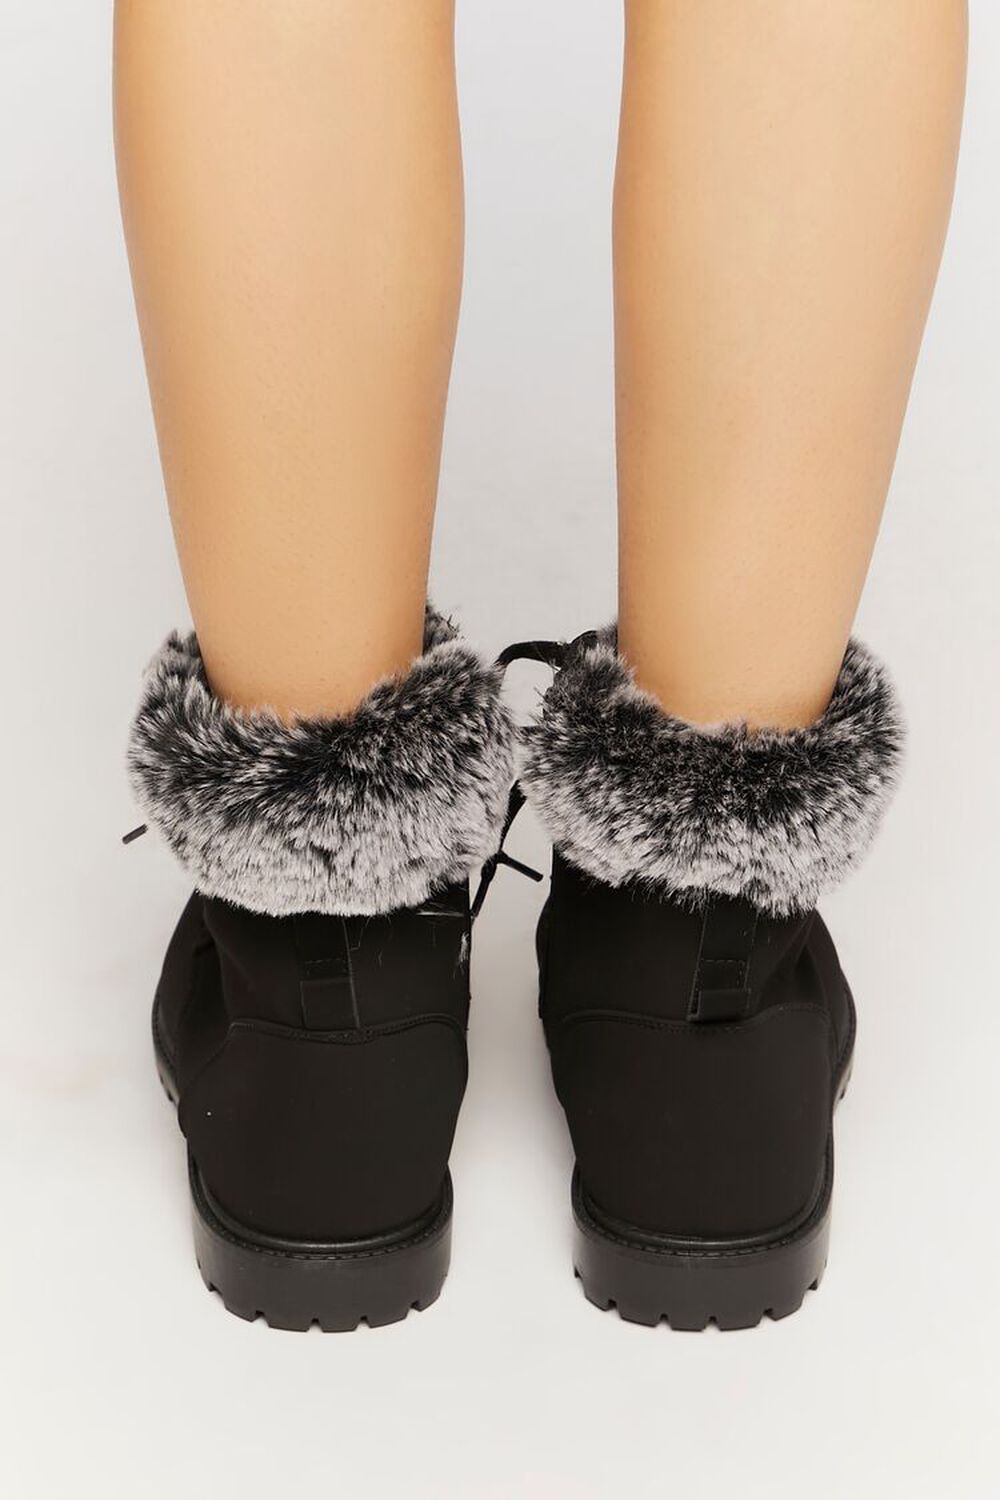 BLACK Faux Fur-Lined Ankle Booties, image 3